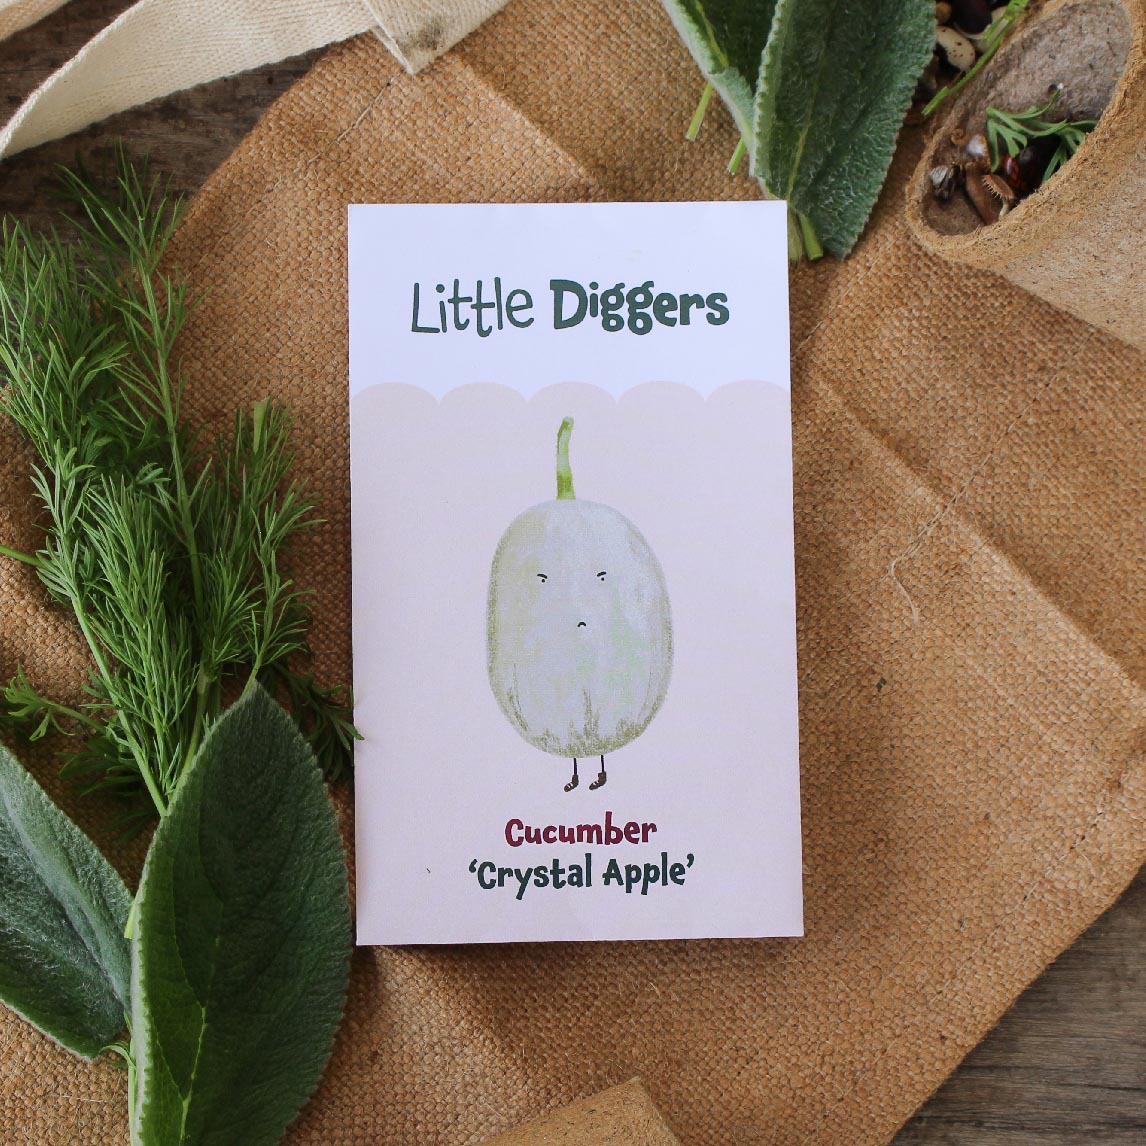 Little Diggers Cucumber 'Crystal Apple'